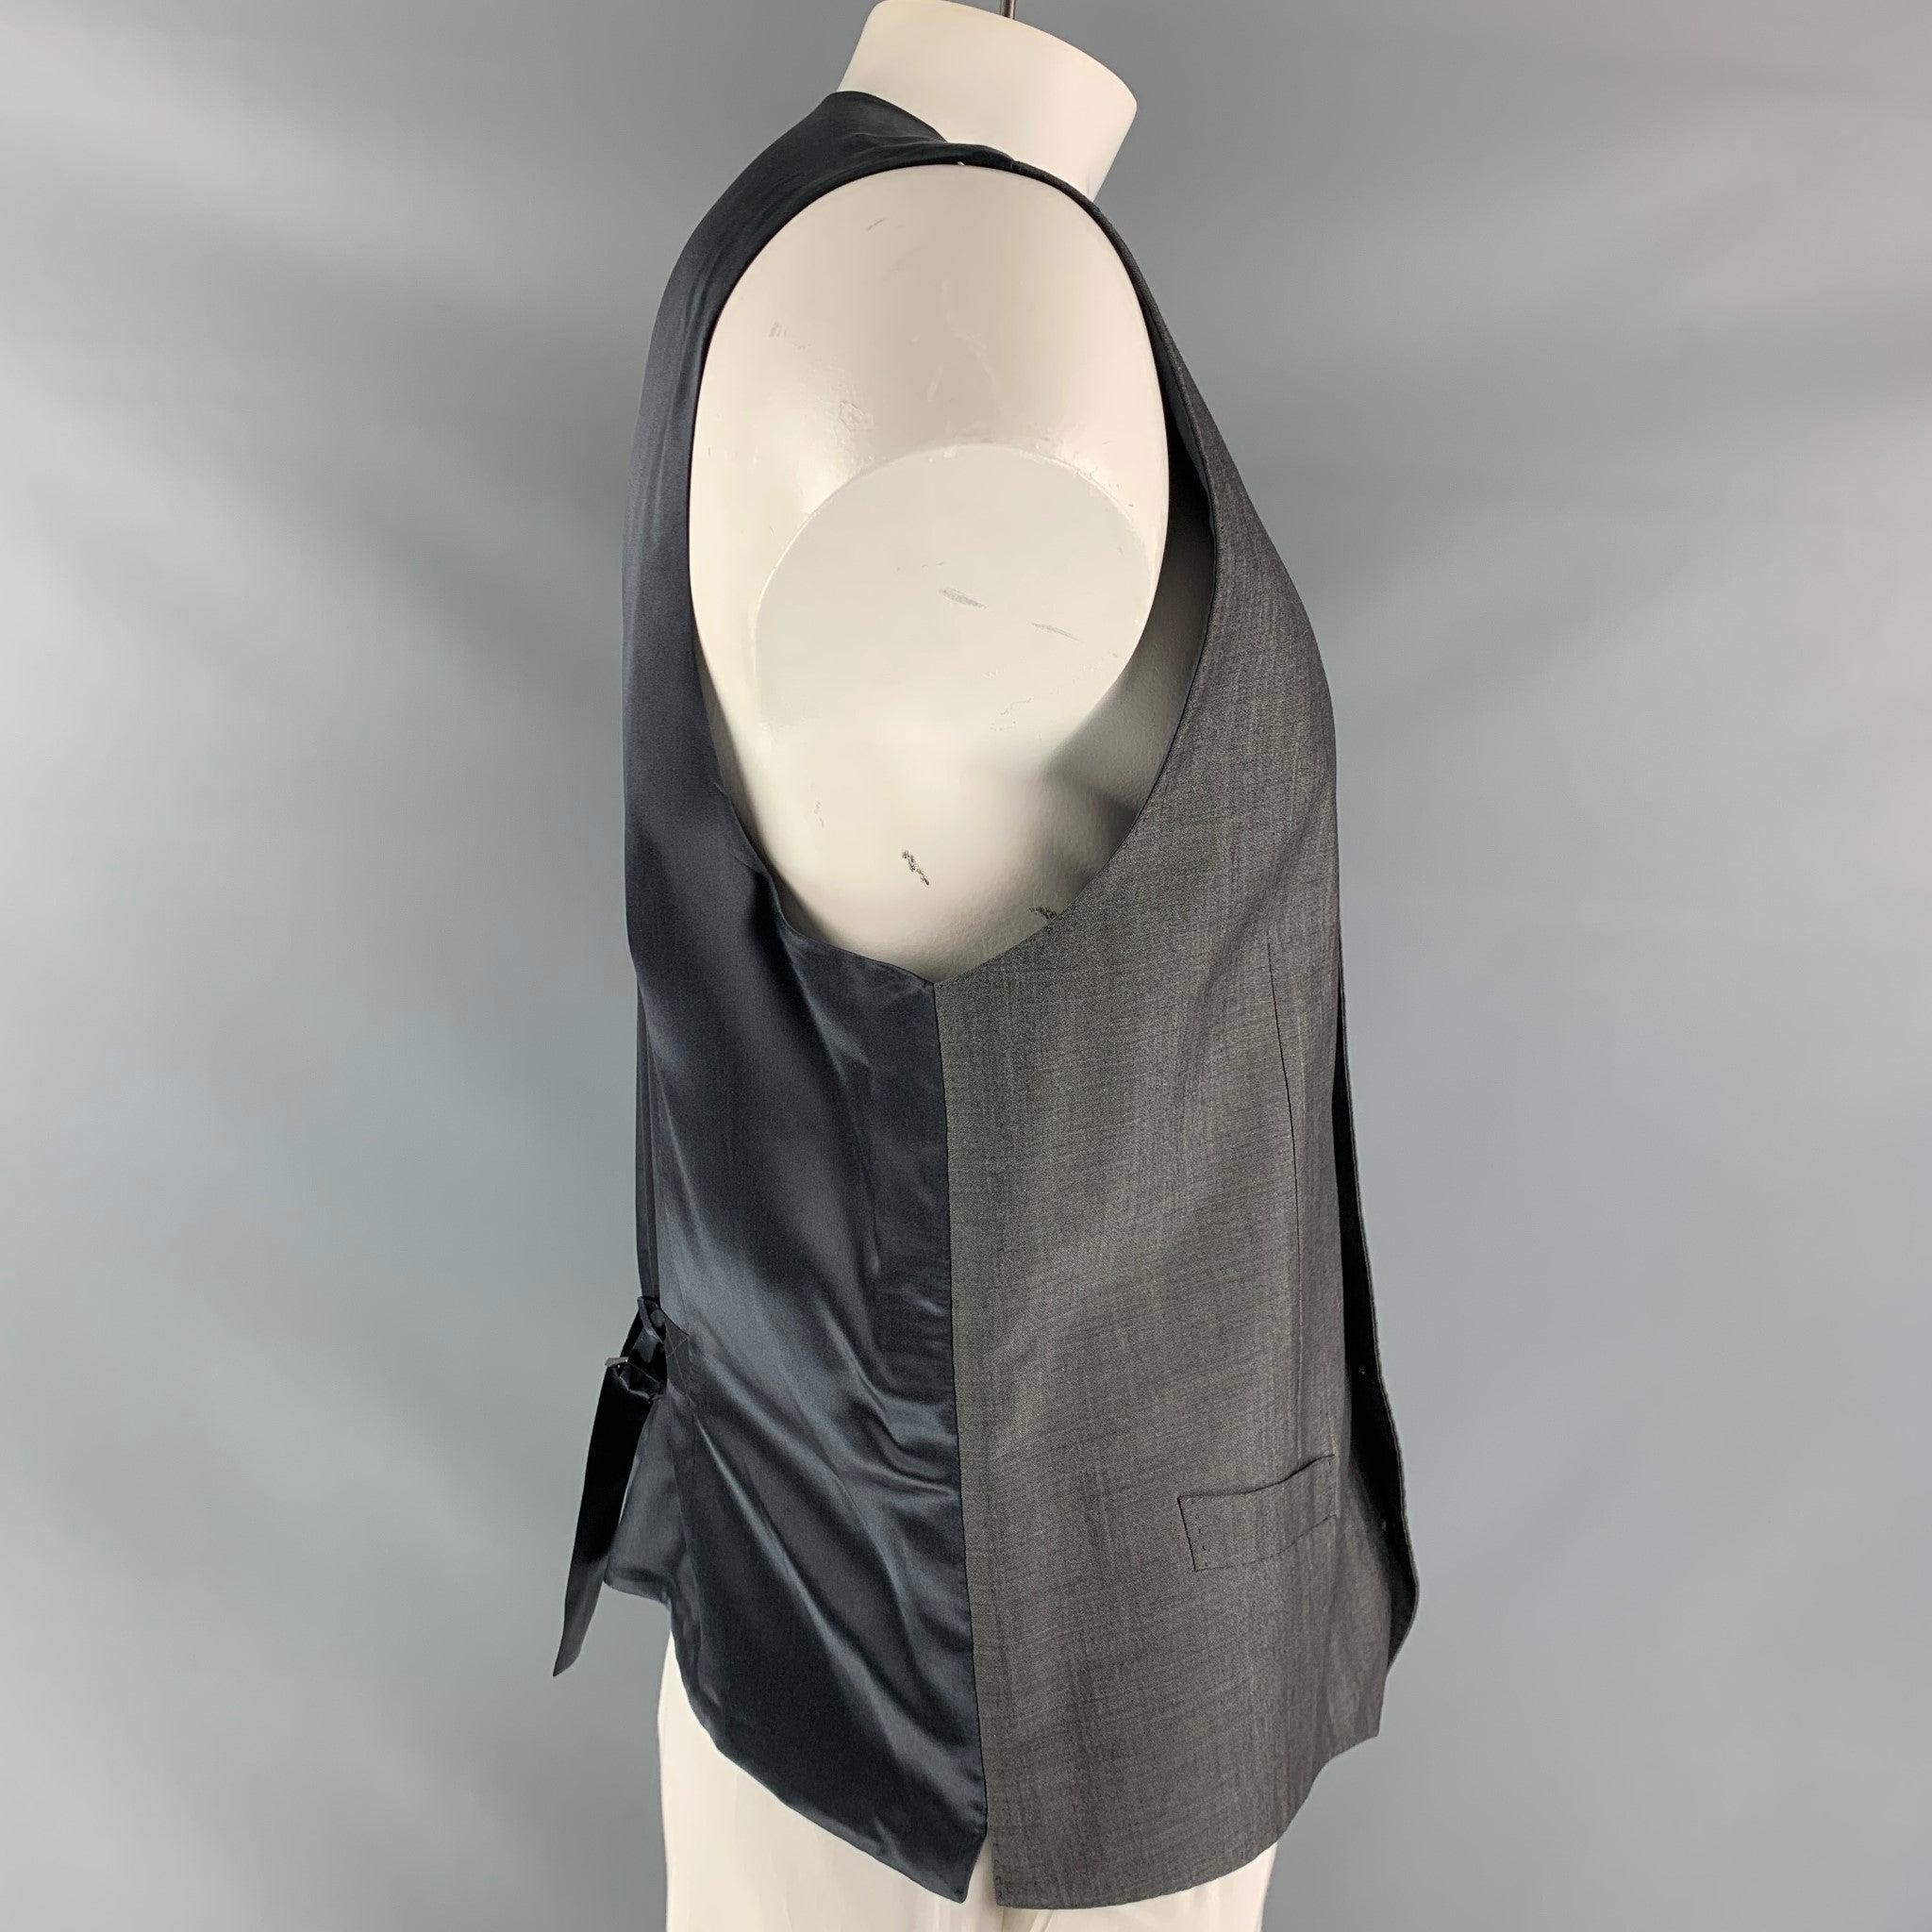 DOLCE & GABBANA alta sartoria dress vest comes in a grey wool, mohair and silk fabric, full lined featuring V- neck, welt pockets, five buttons down closure, dark grey silk satin fabric at back and adjustable belt. Made in Italy.Excellent Pre-Owned